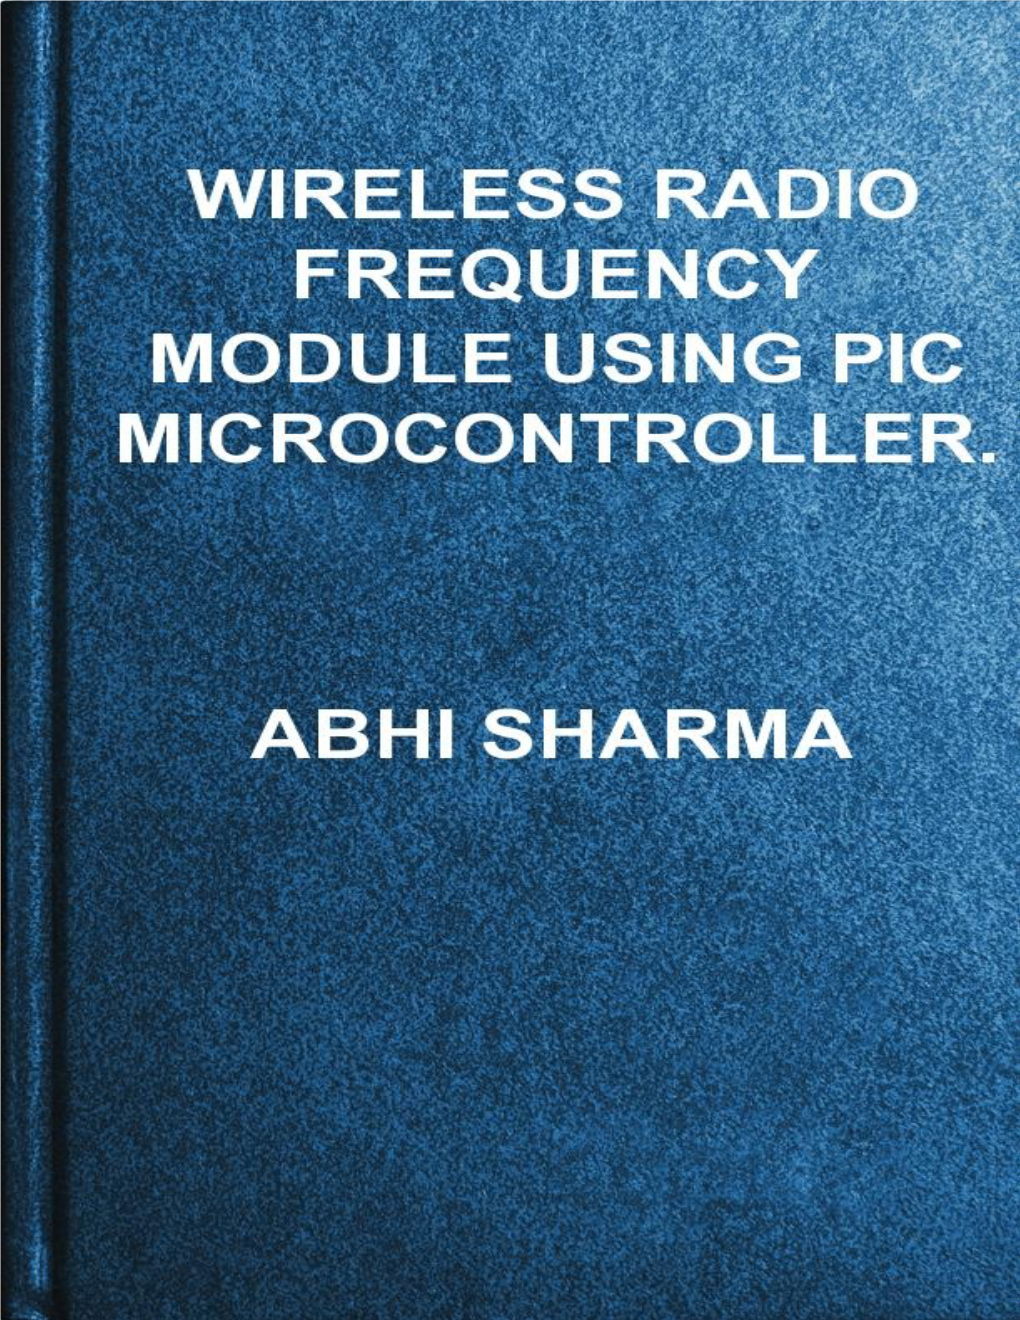 Wireless Radio Frequency Module Using PIC Microcontroller